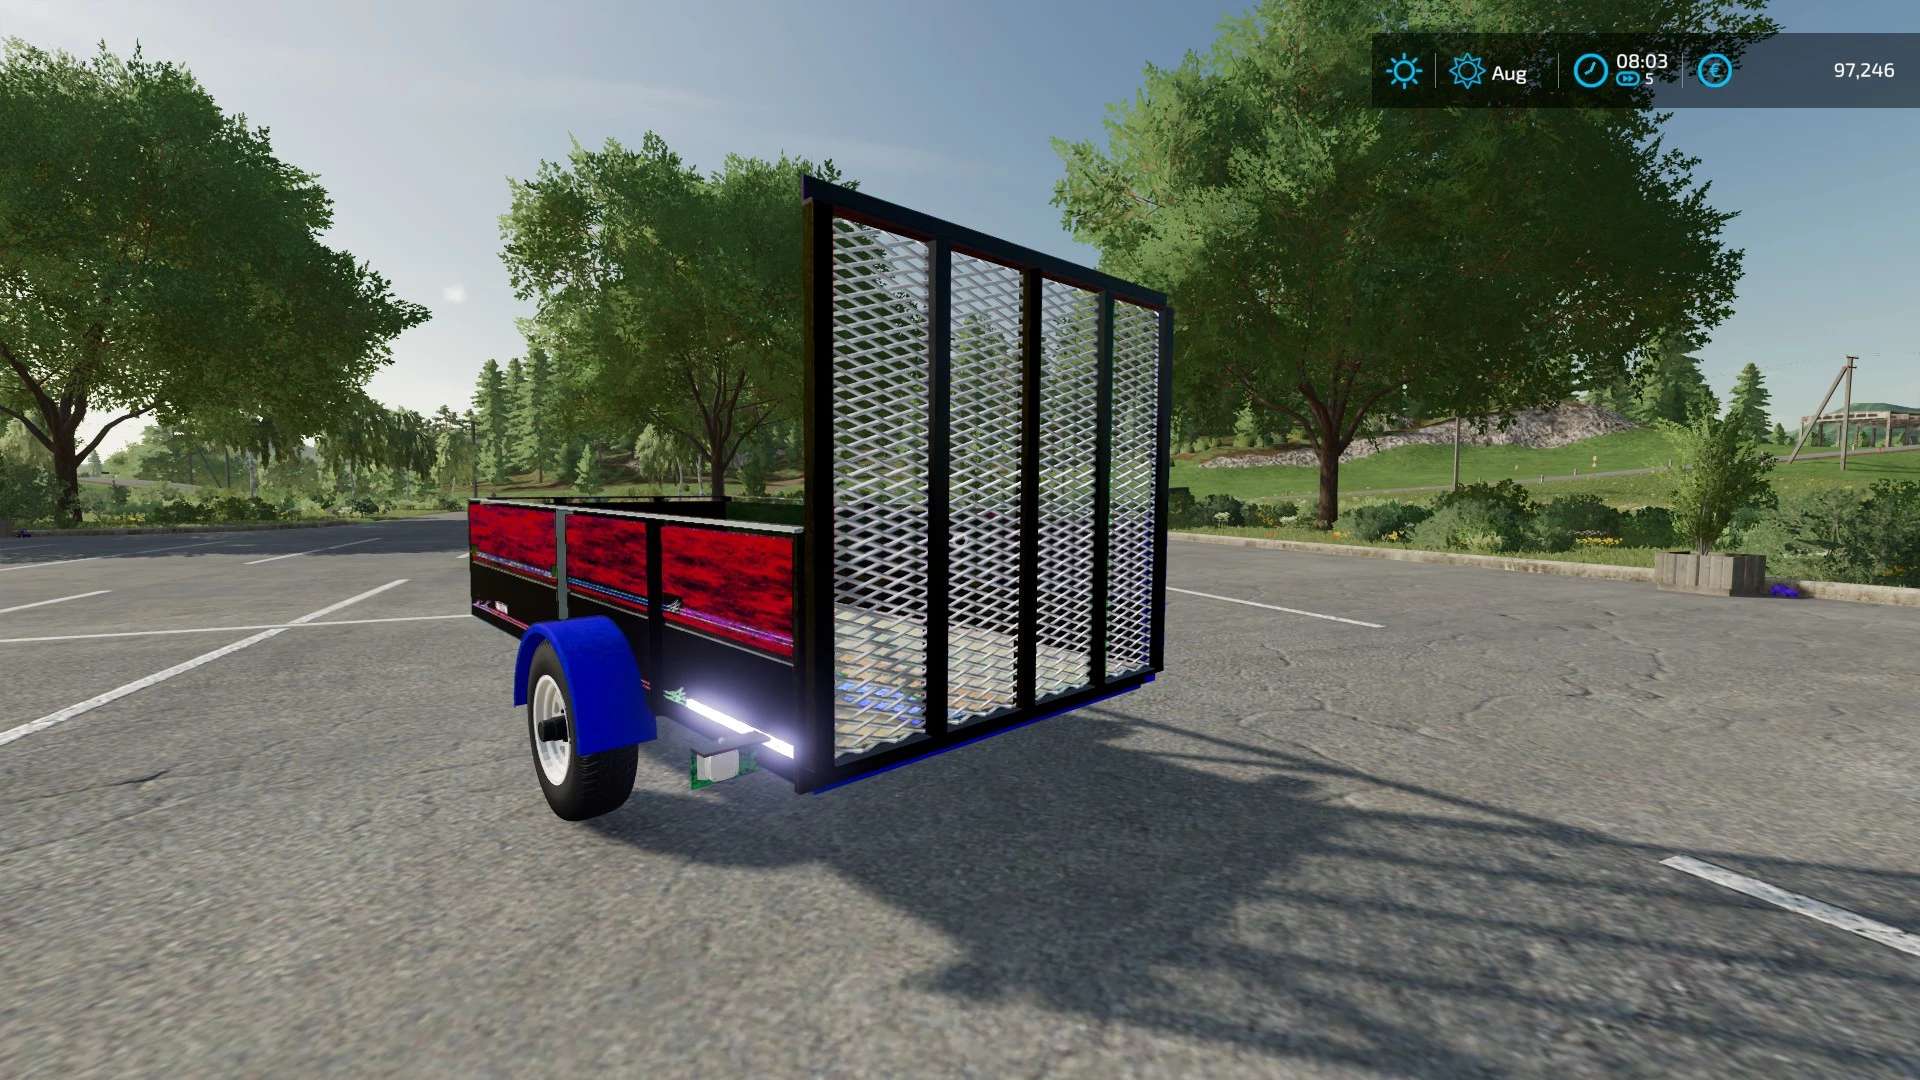 Fs22 1999 Neal Manufacturing Utility Trailer Converted V10 Fs 22 Trailers Mod Download 6318